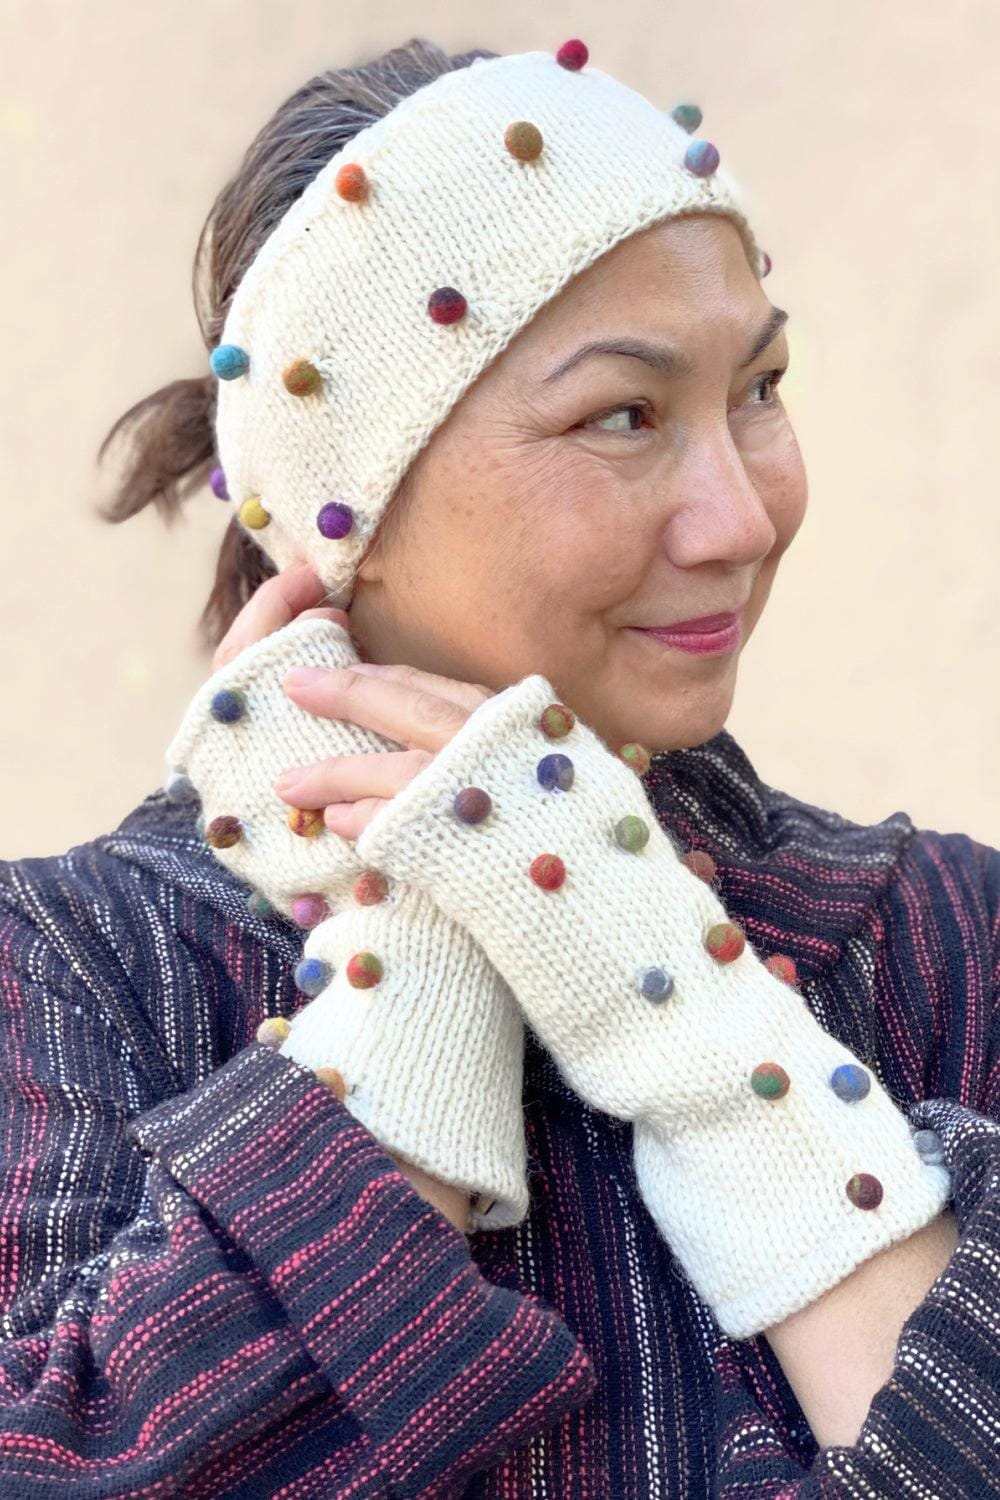 Winter white wool Headband with Felted Dots worn with matching fingerless gloves.